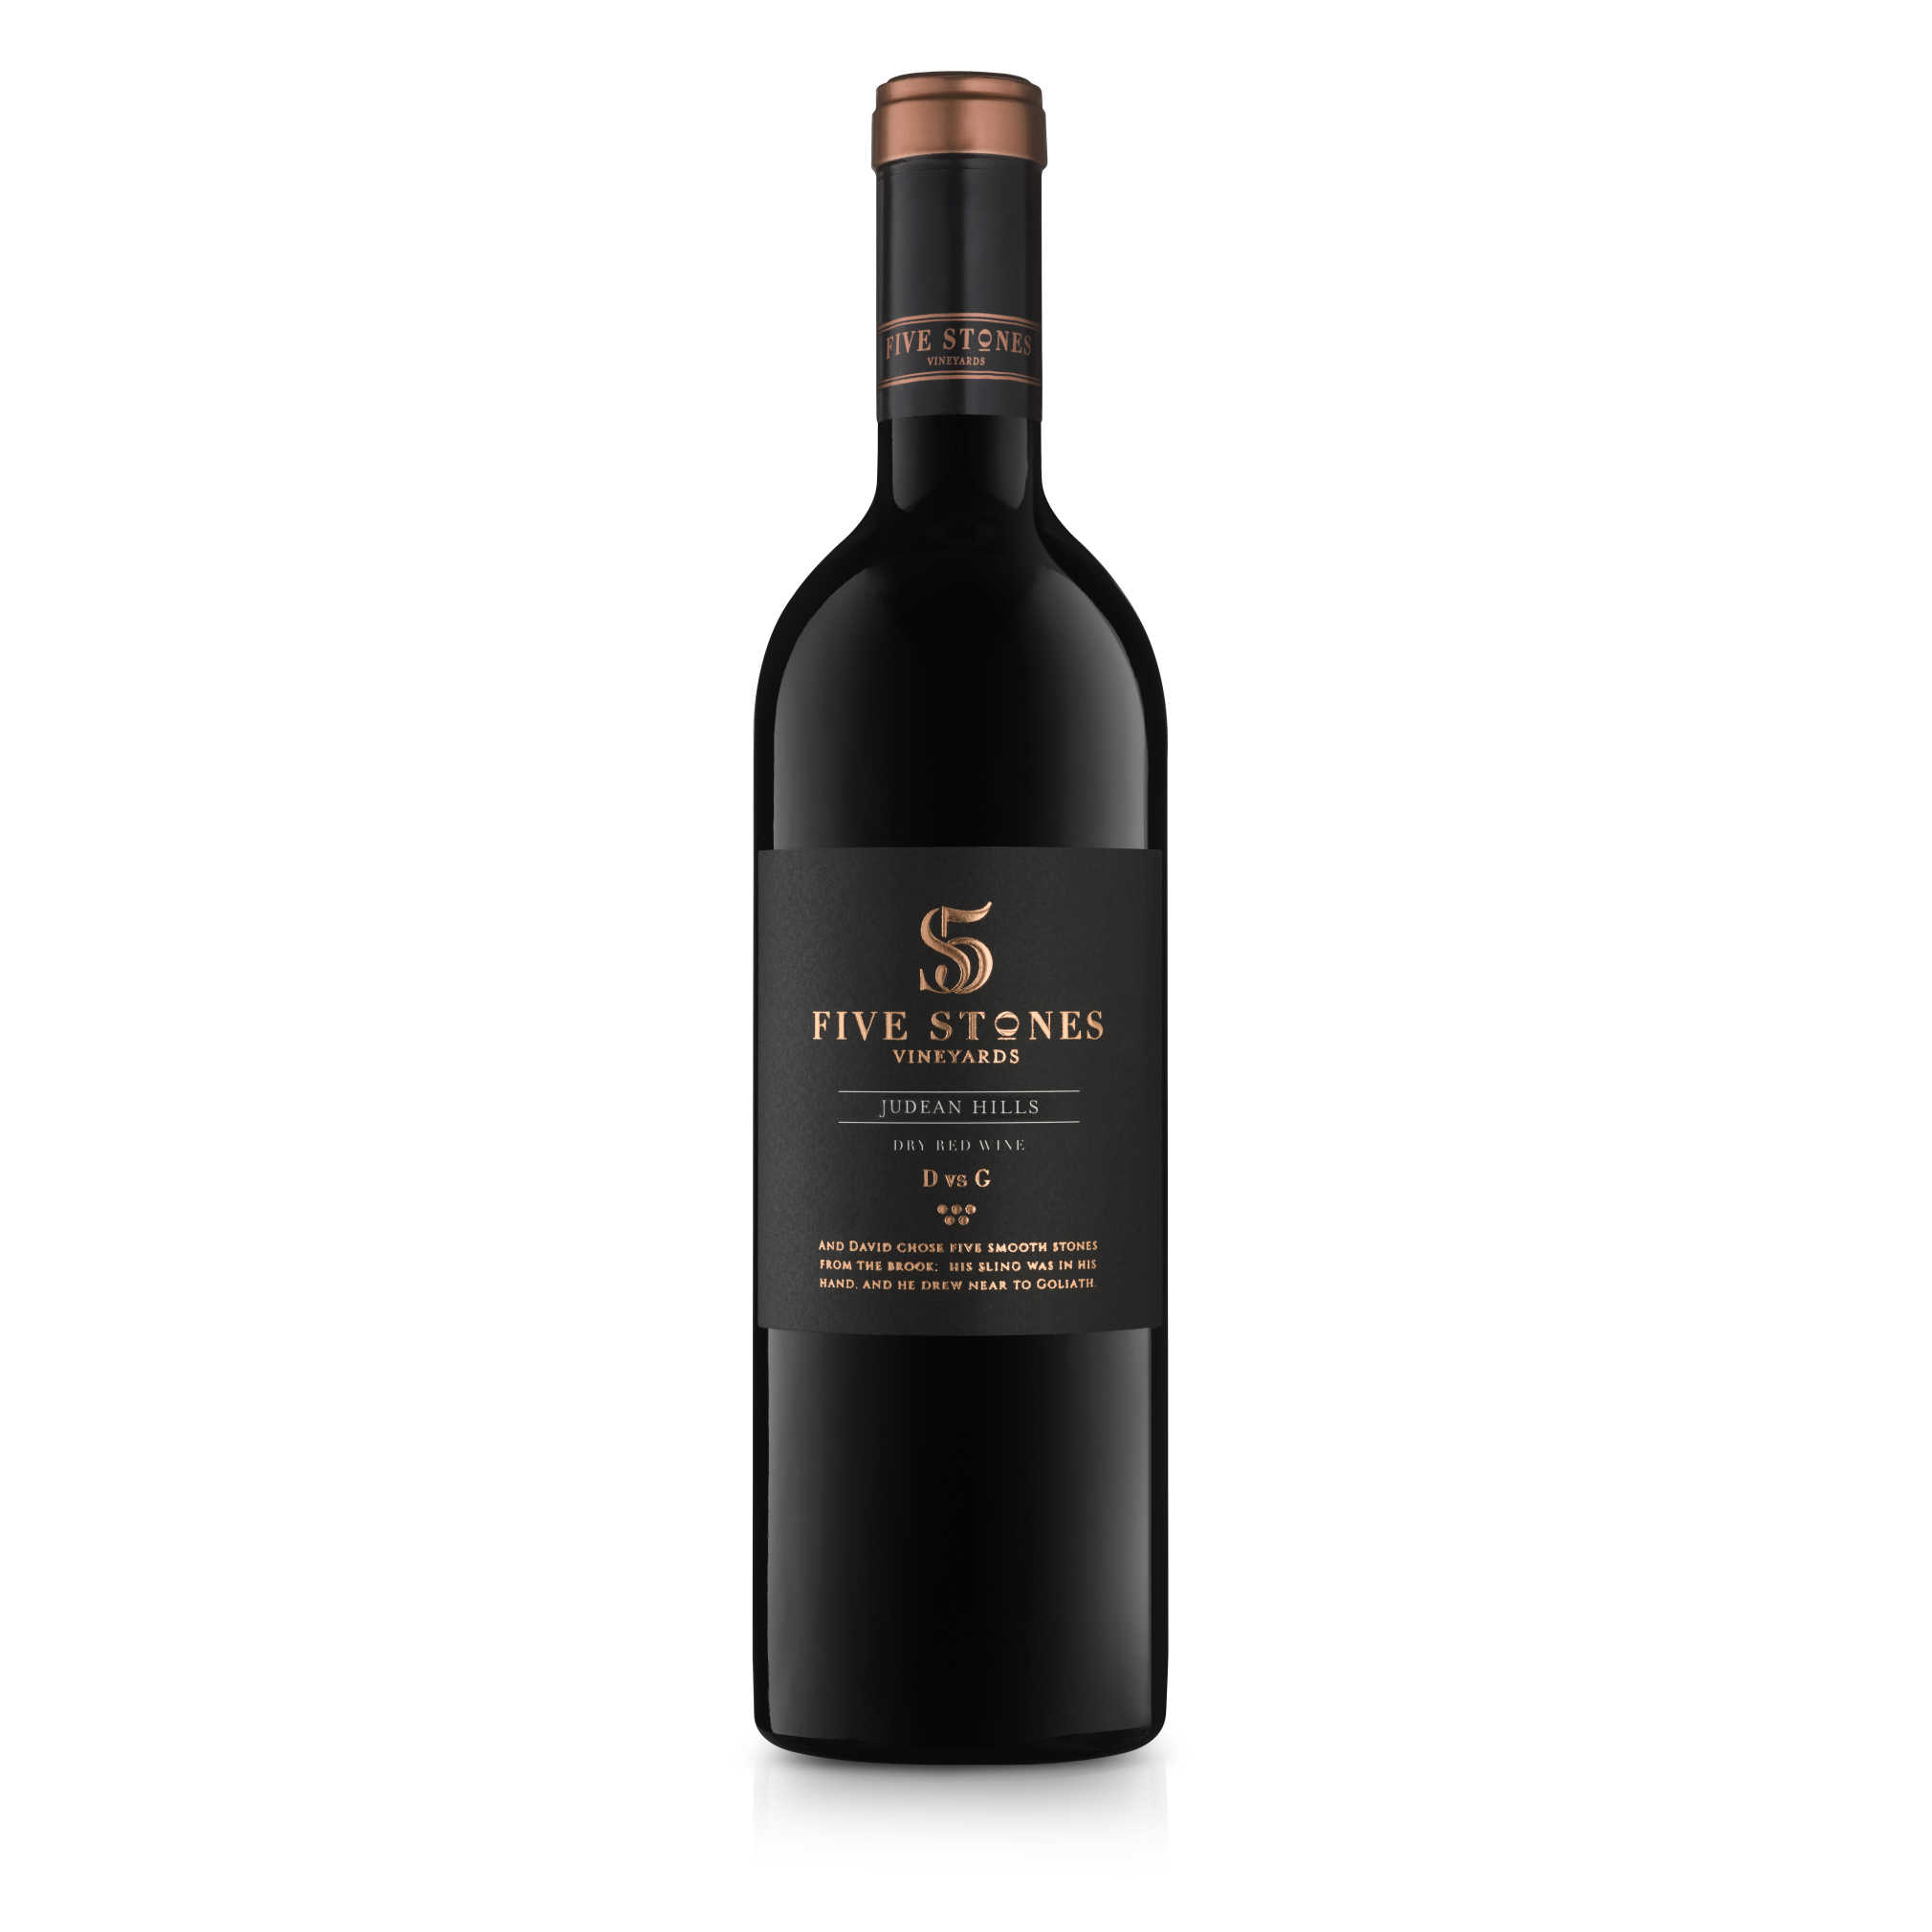 Five Stones D Vs G Red - A Kosher Wine From Israel